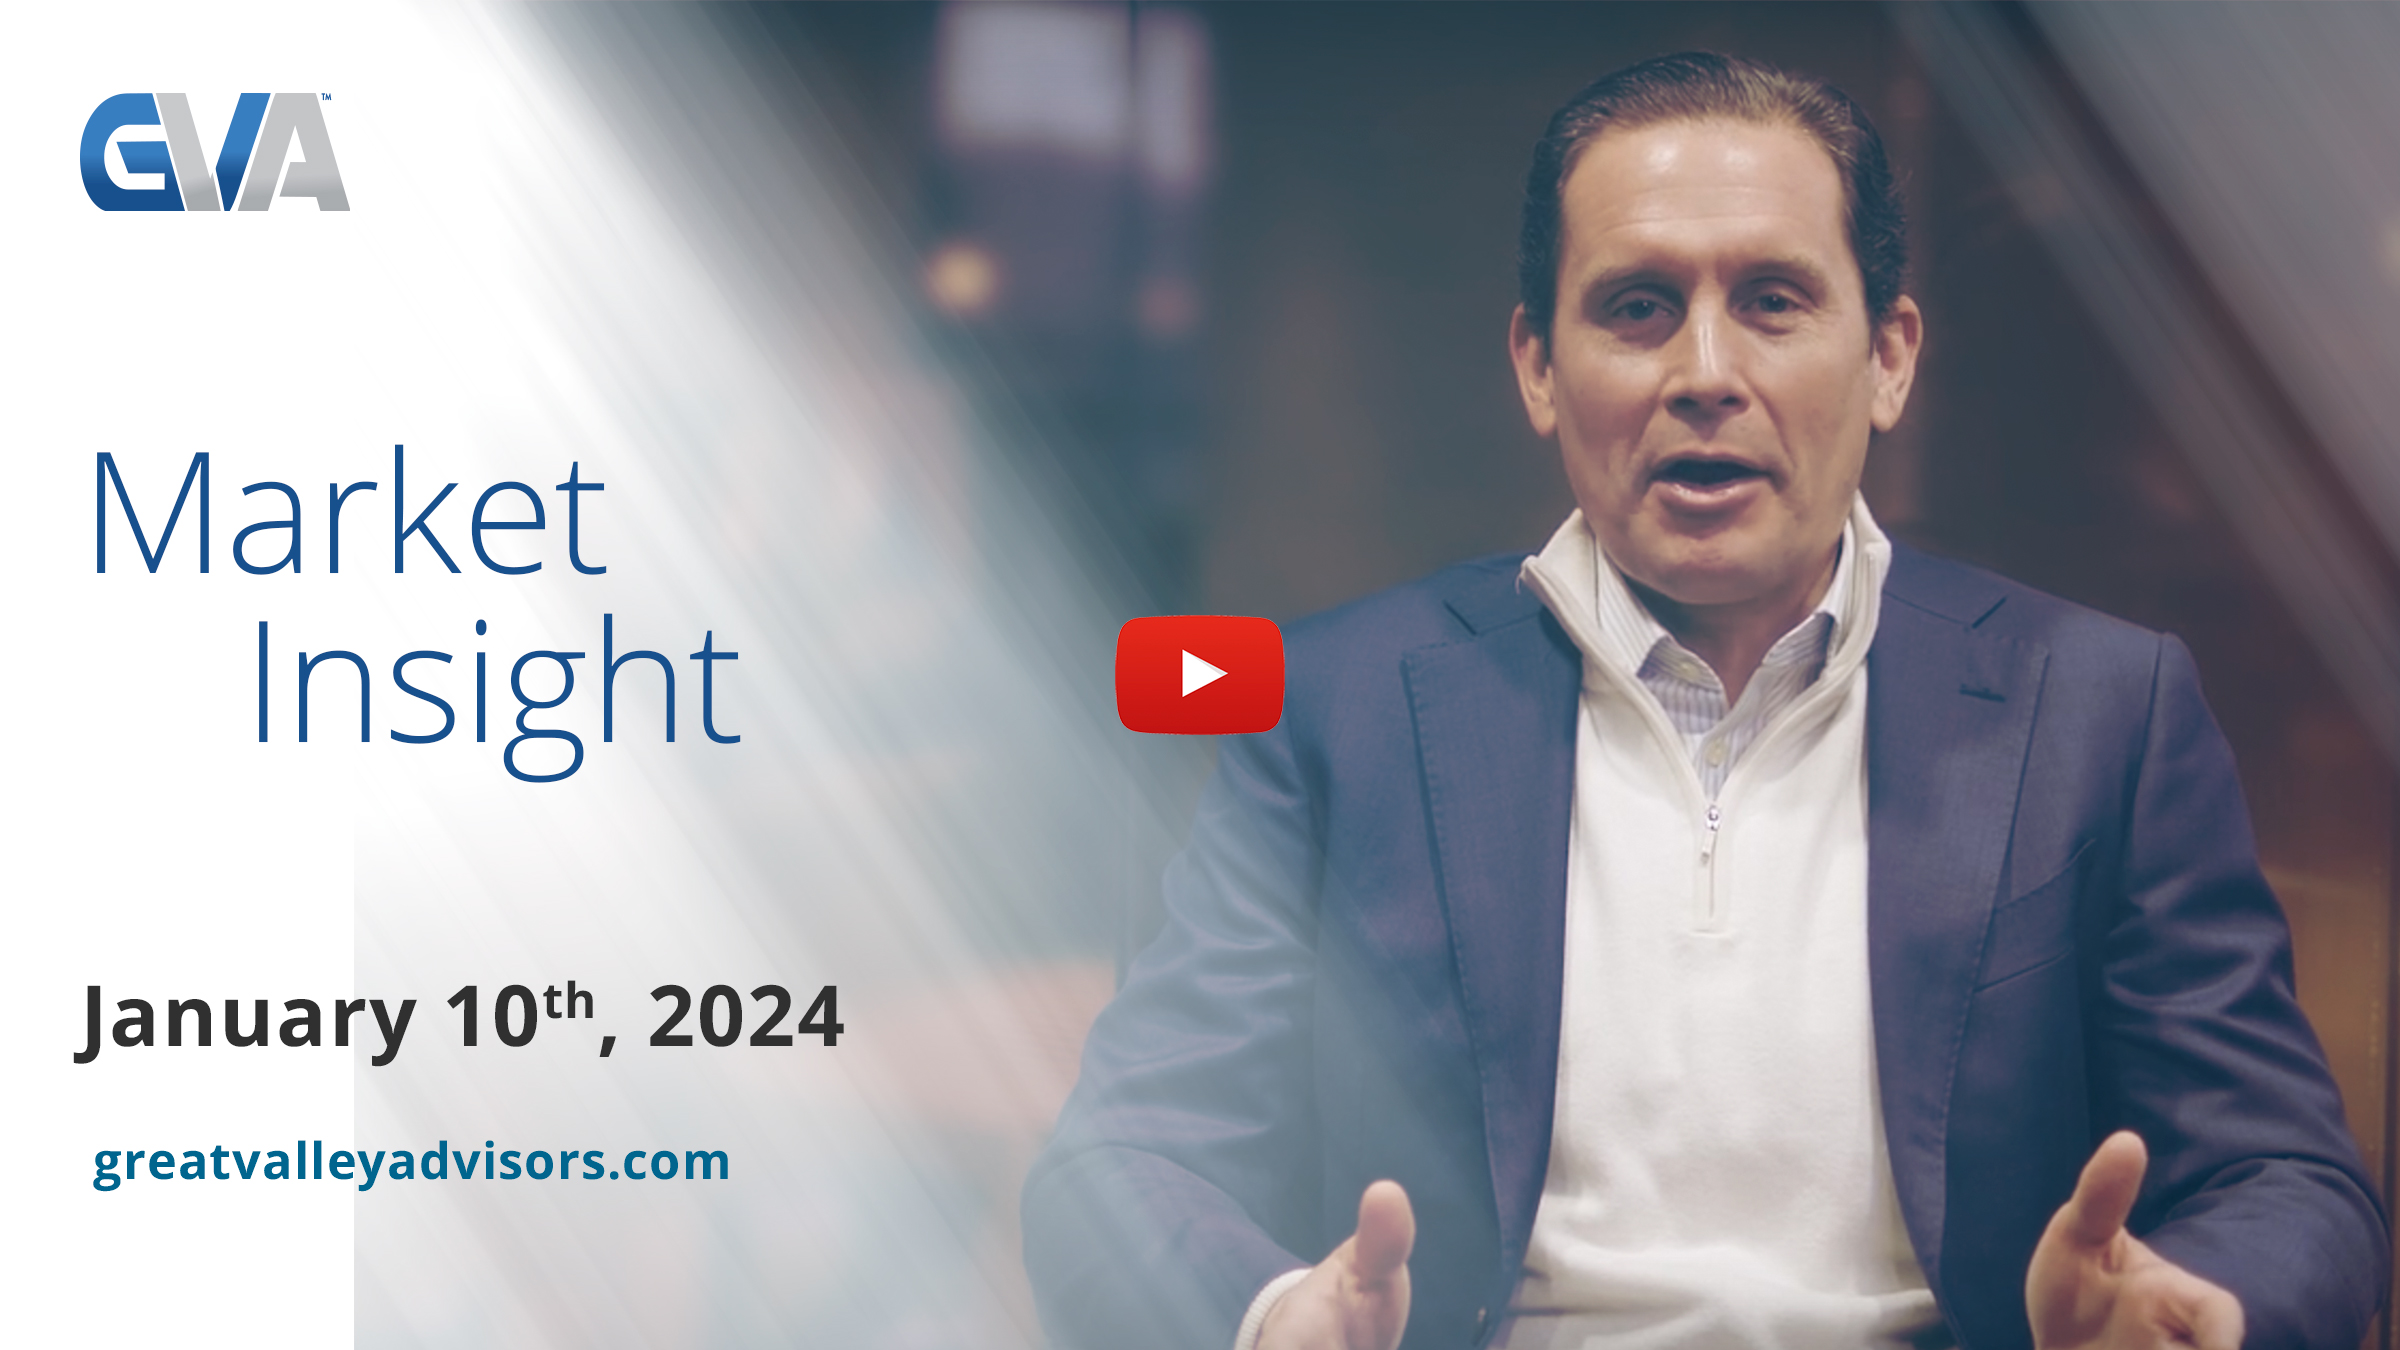 Market Insights with Eric: Episode 16, January 10th, 2024